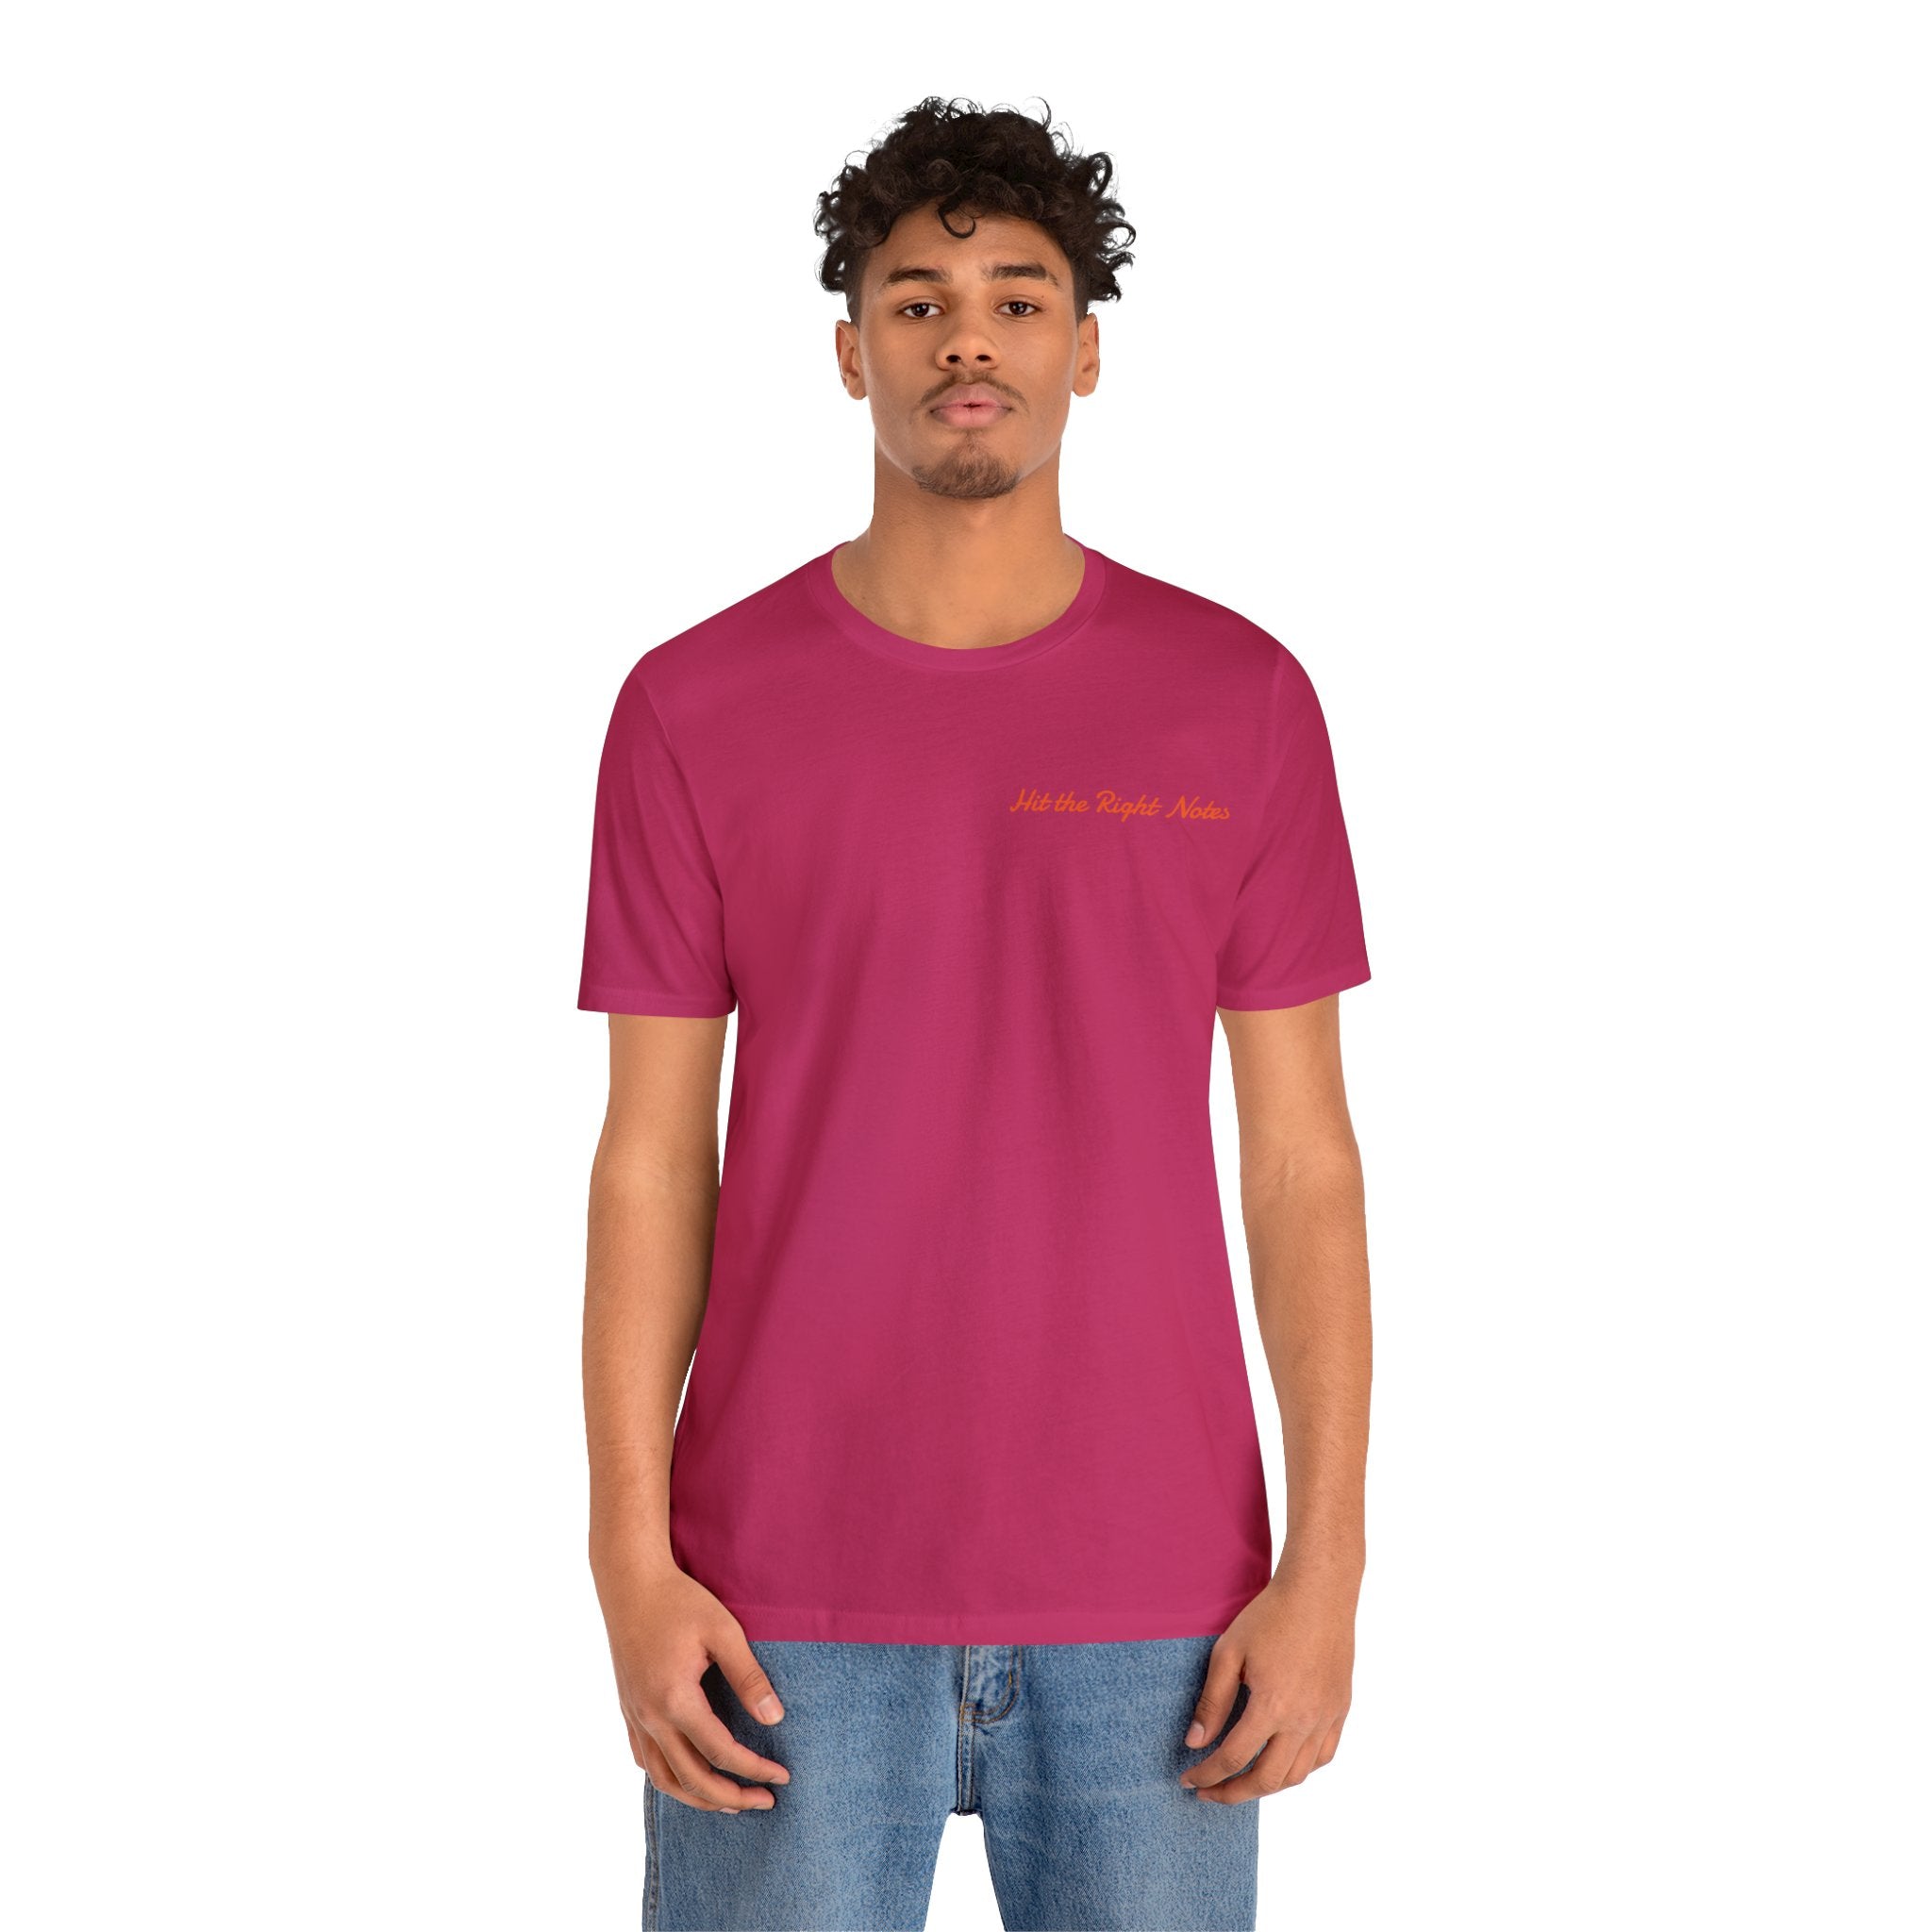 Hit the Right Notes Jersey Tee - Bella+Canvas 3001 Heather Mauve Classic Tee Comfortable Tee Cotton T-Shirt Graphic Tee JerseyTee Statement Shirt T-shirt Tee Unisex Apparel T-Shirt 5295938461964949311_2048 Printify